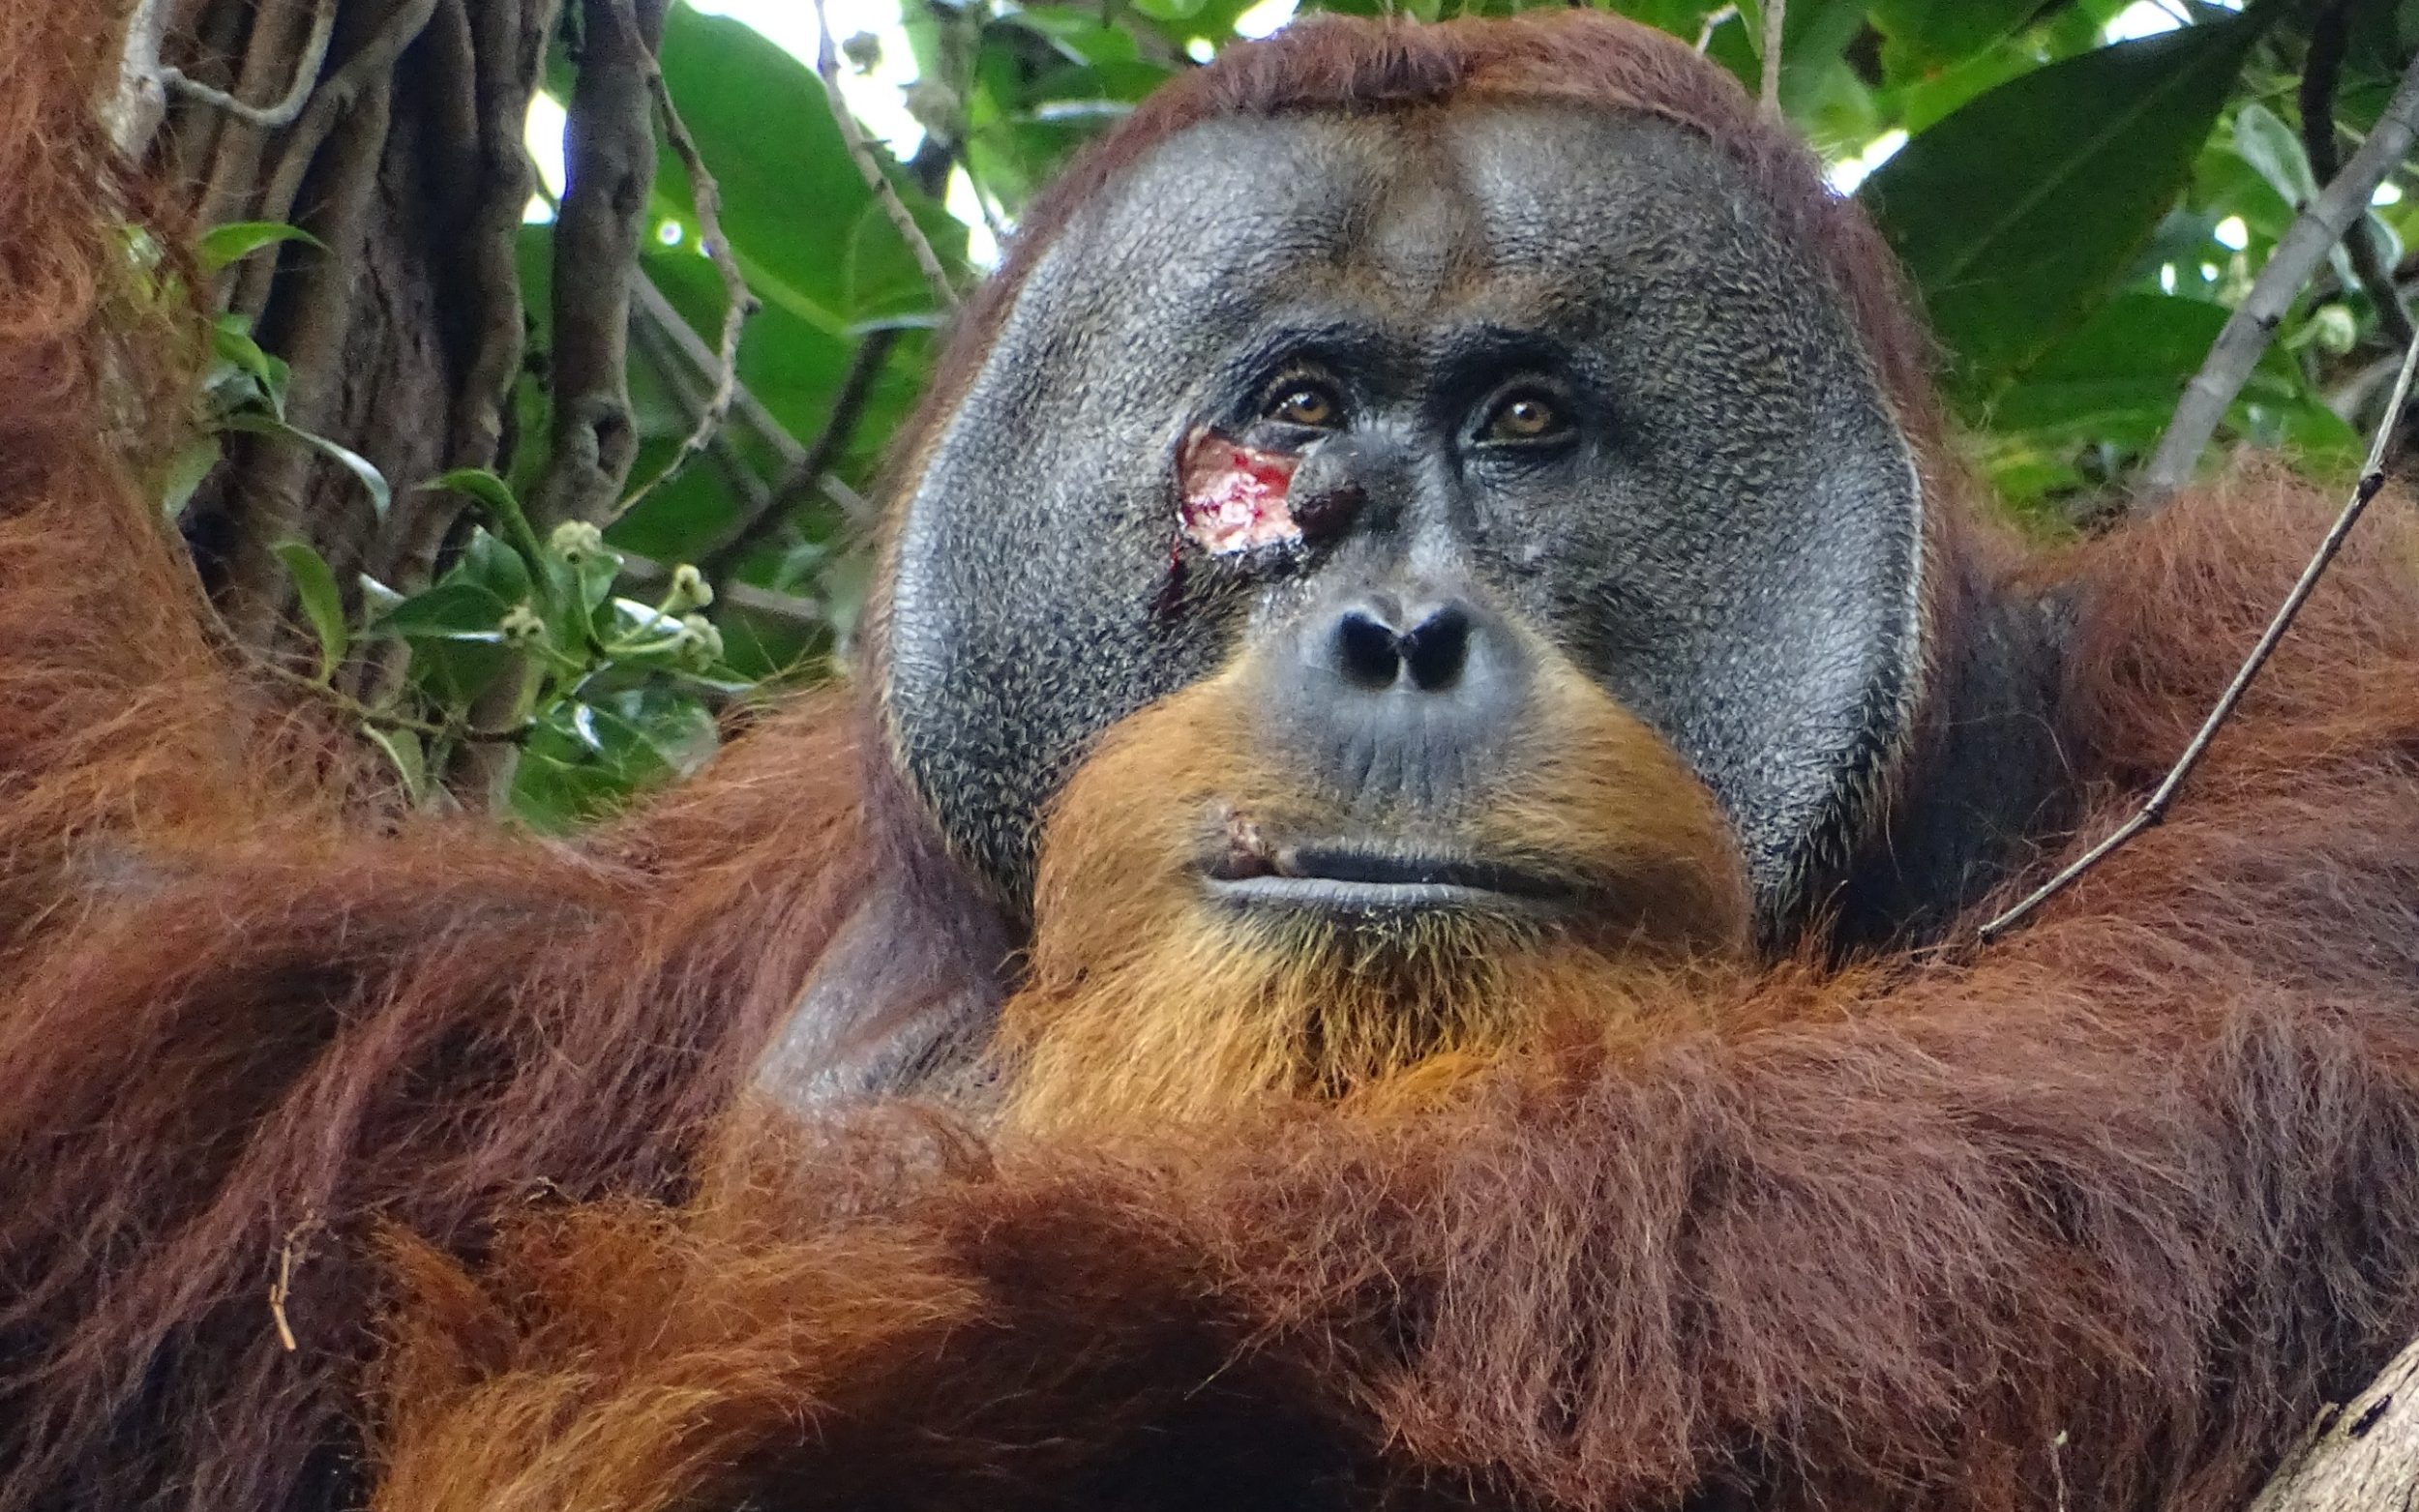 orangutan treats wound with medicinal plant in first for animals